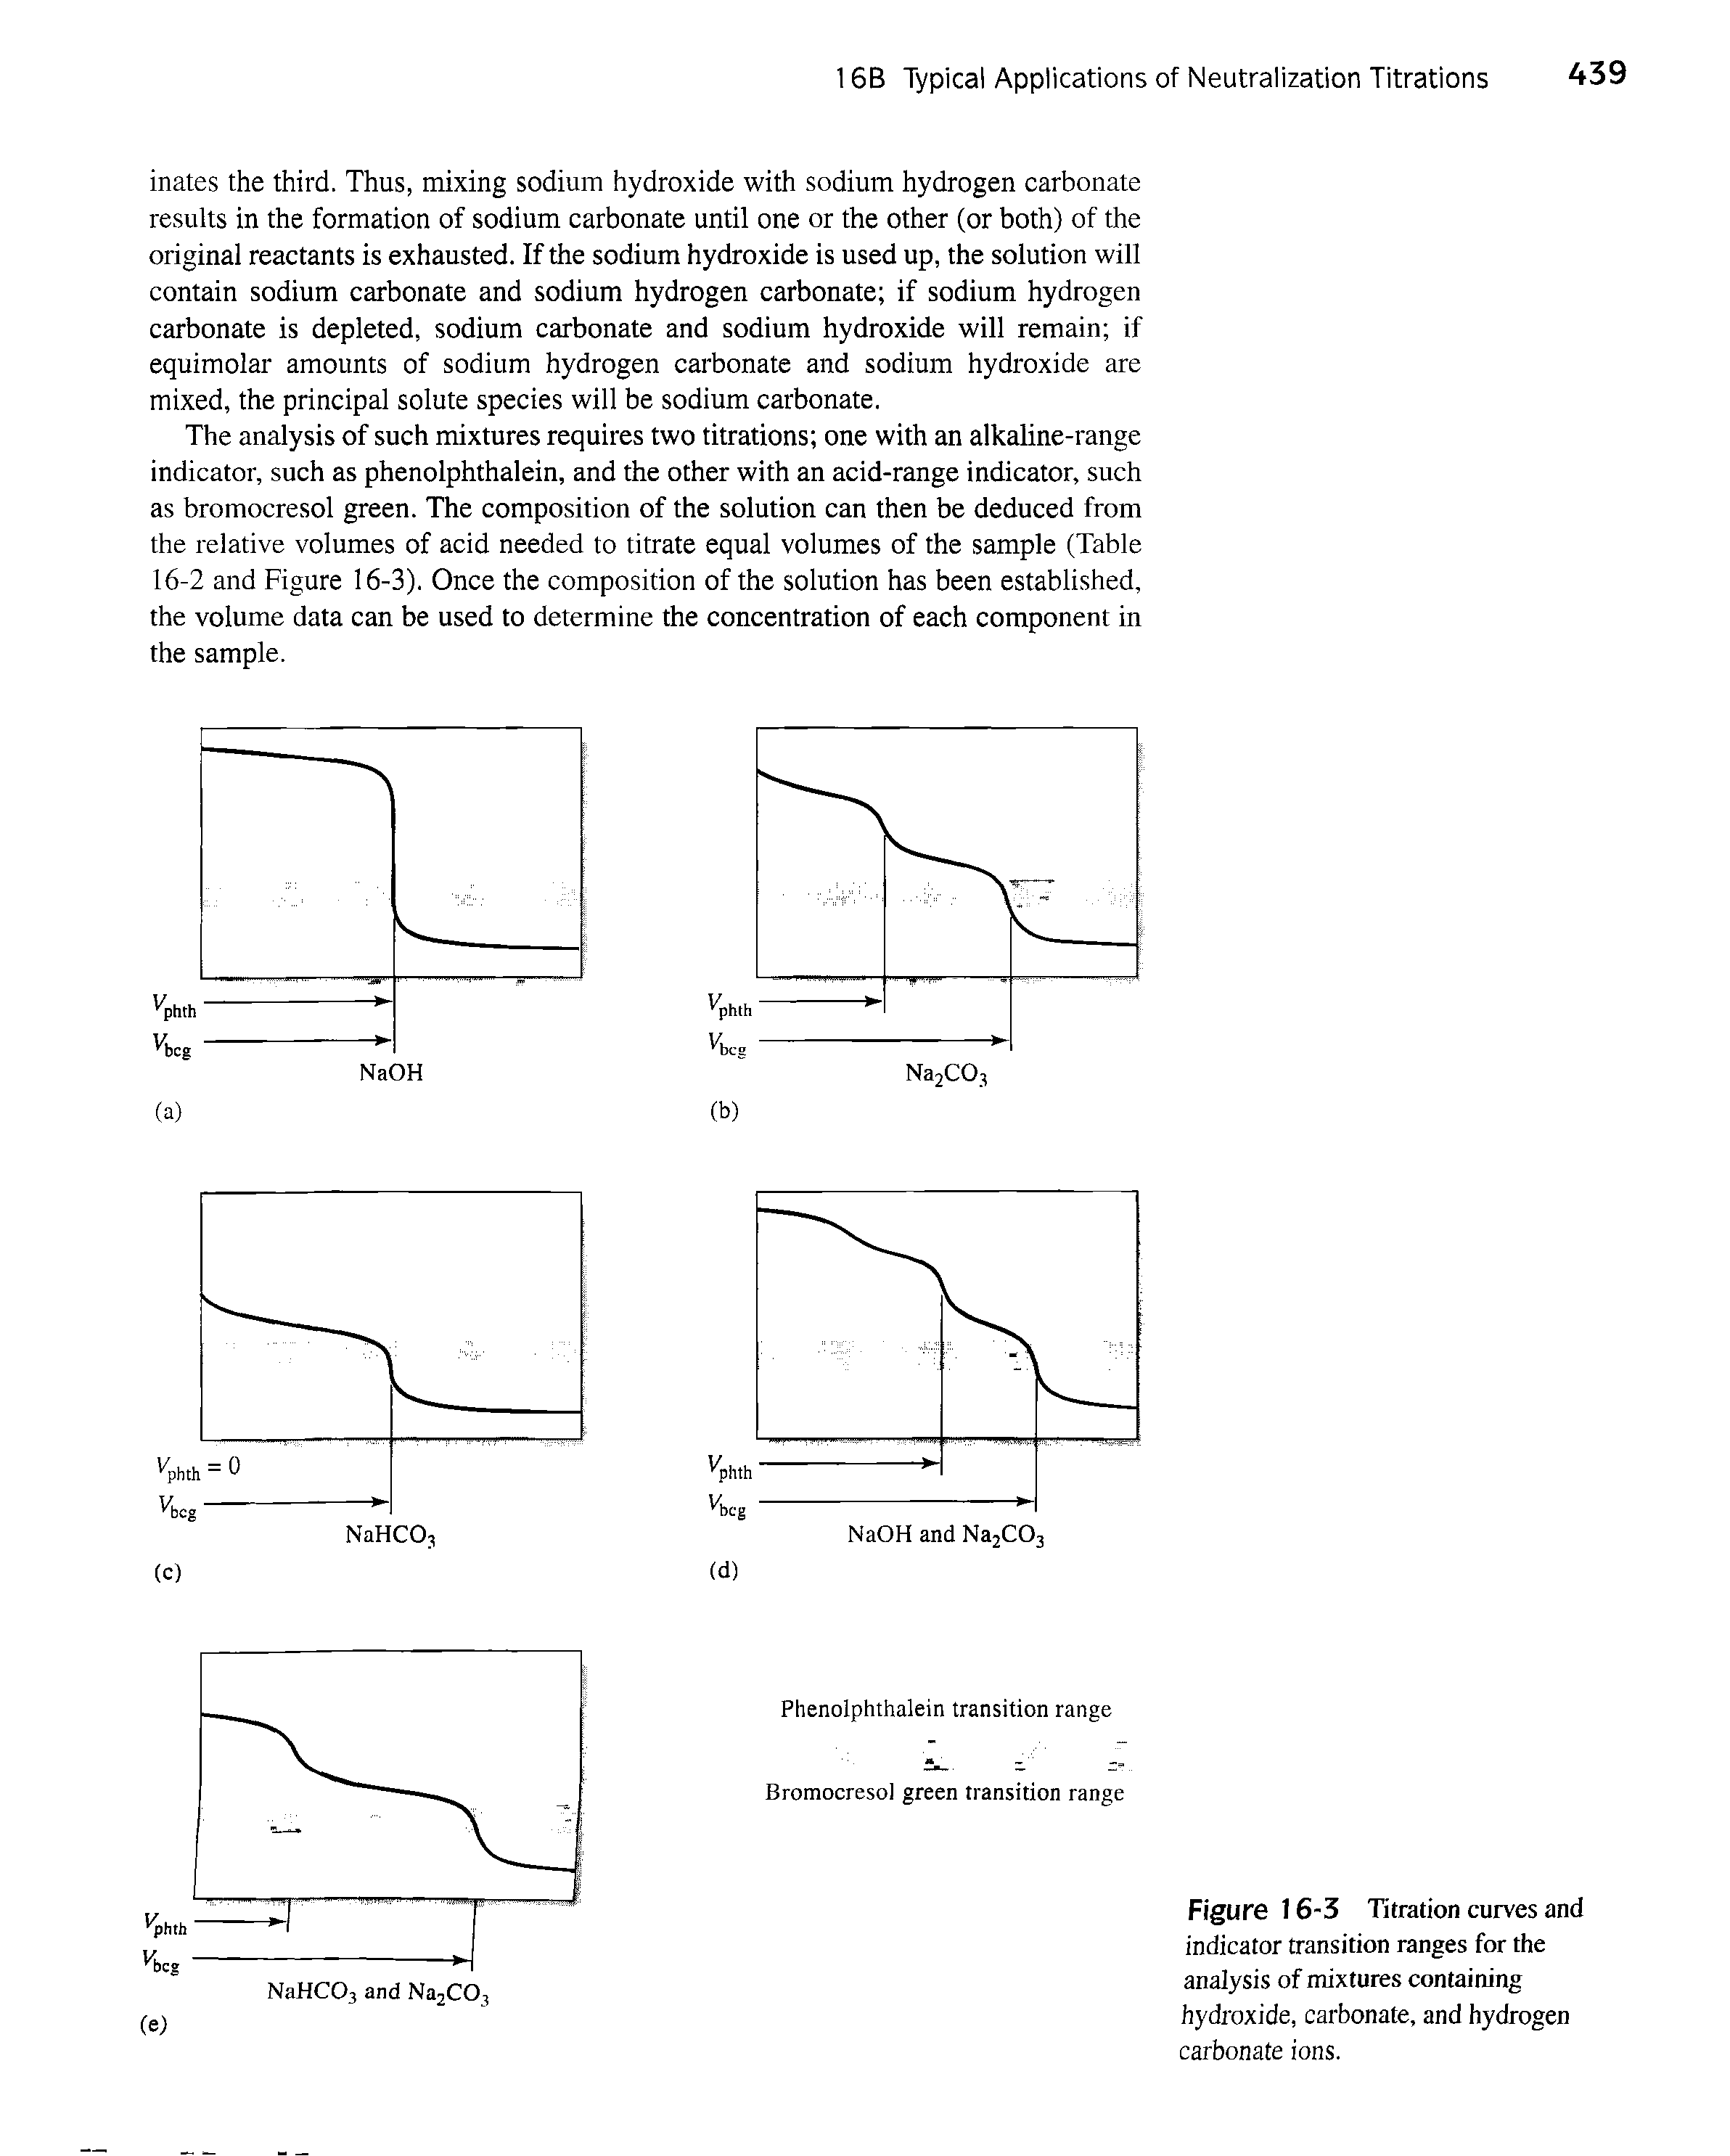 Figure 16-3 Titration curves and indicator transition ranges for the analysis of mixtures containing hydroxide, carbonate, and hydrogen carbonate ions.